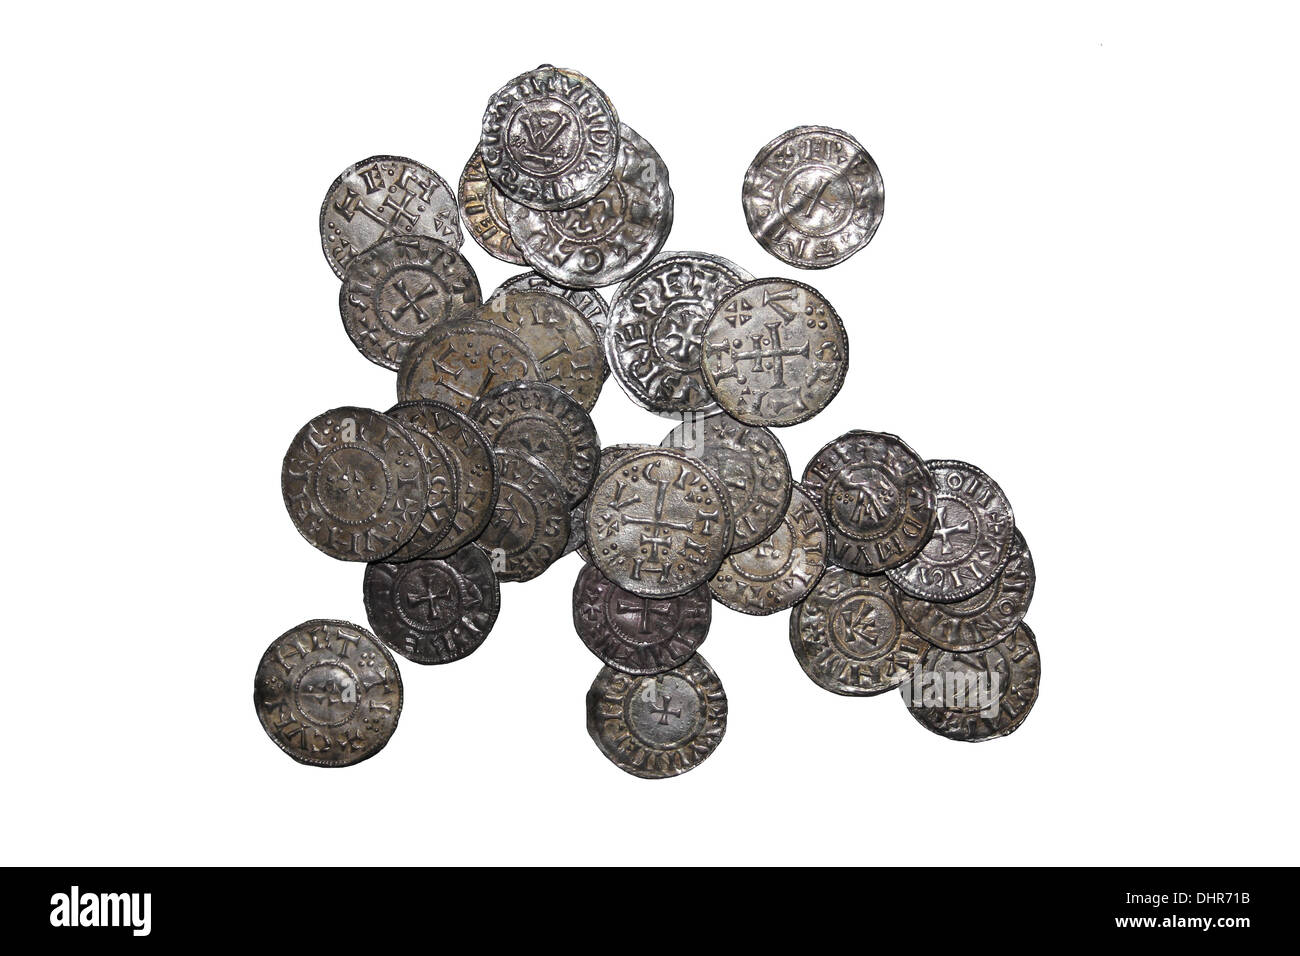 Viking Age Silver Coins From The Cuerdale Hoard, Lancashire Stock Photo